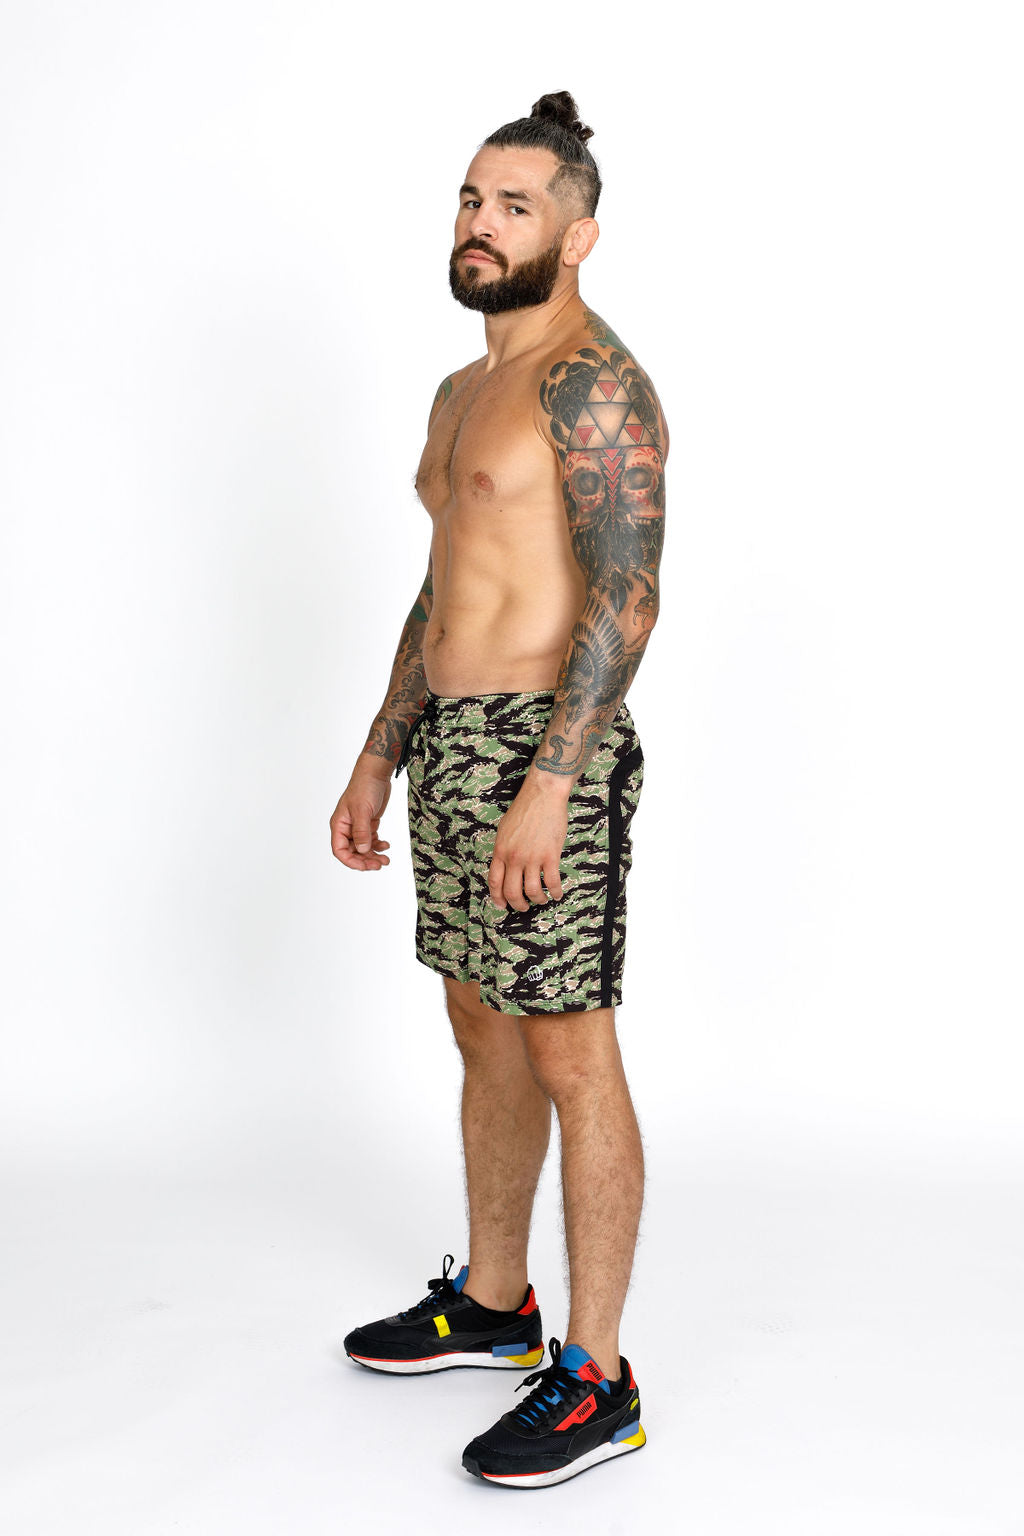 Men's Beach Gear: Your Ultimate Guide to Stylish Essentials – Shop OpenStore